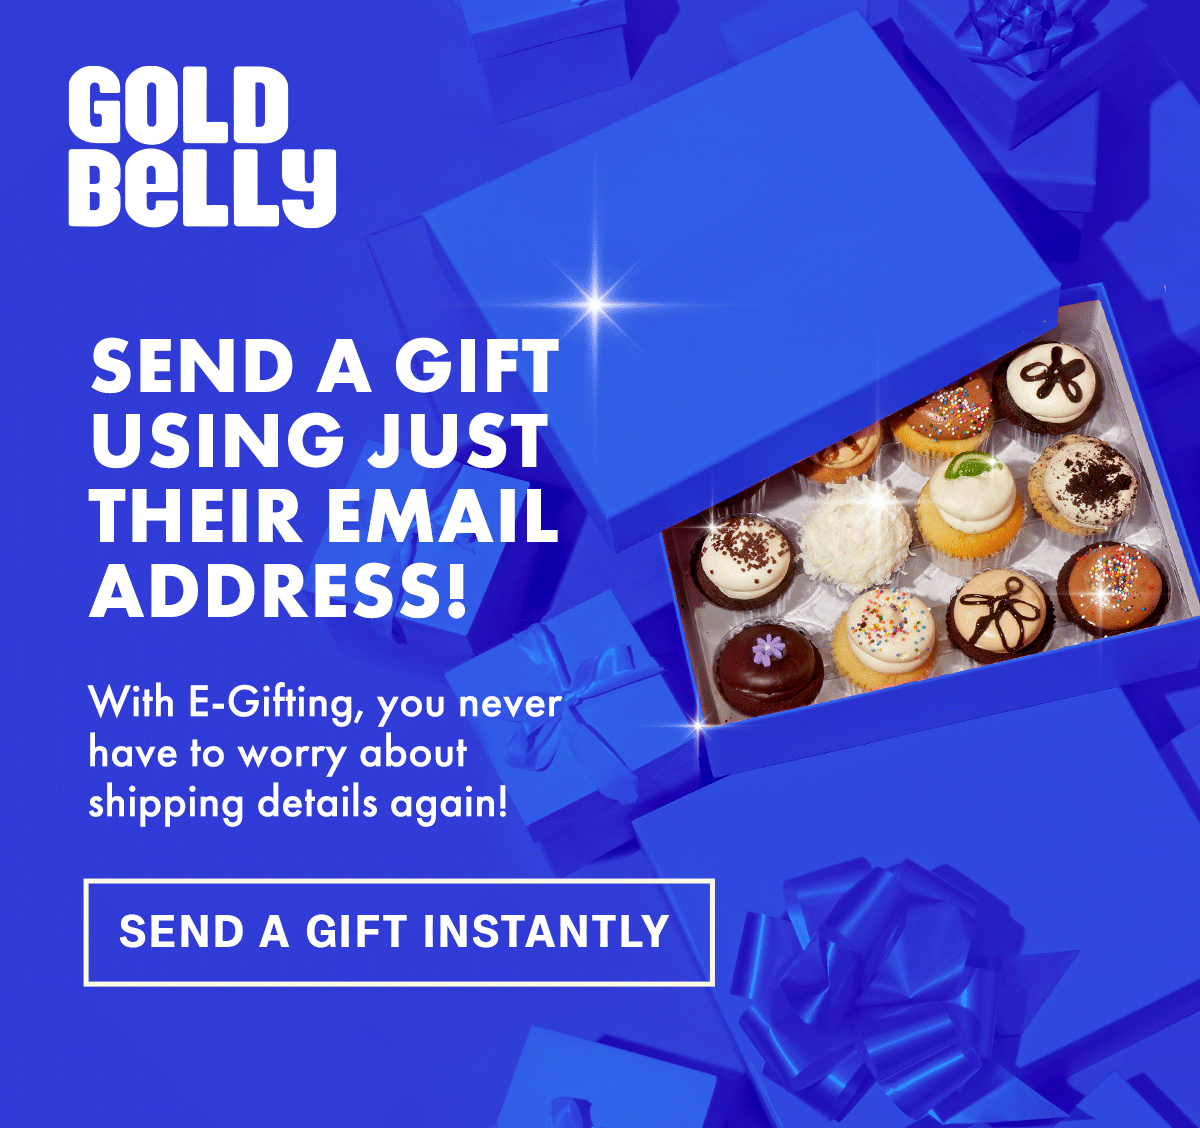 Send a gift instantly